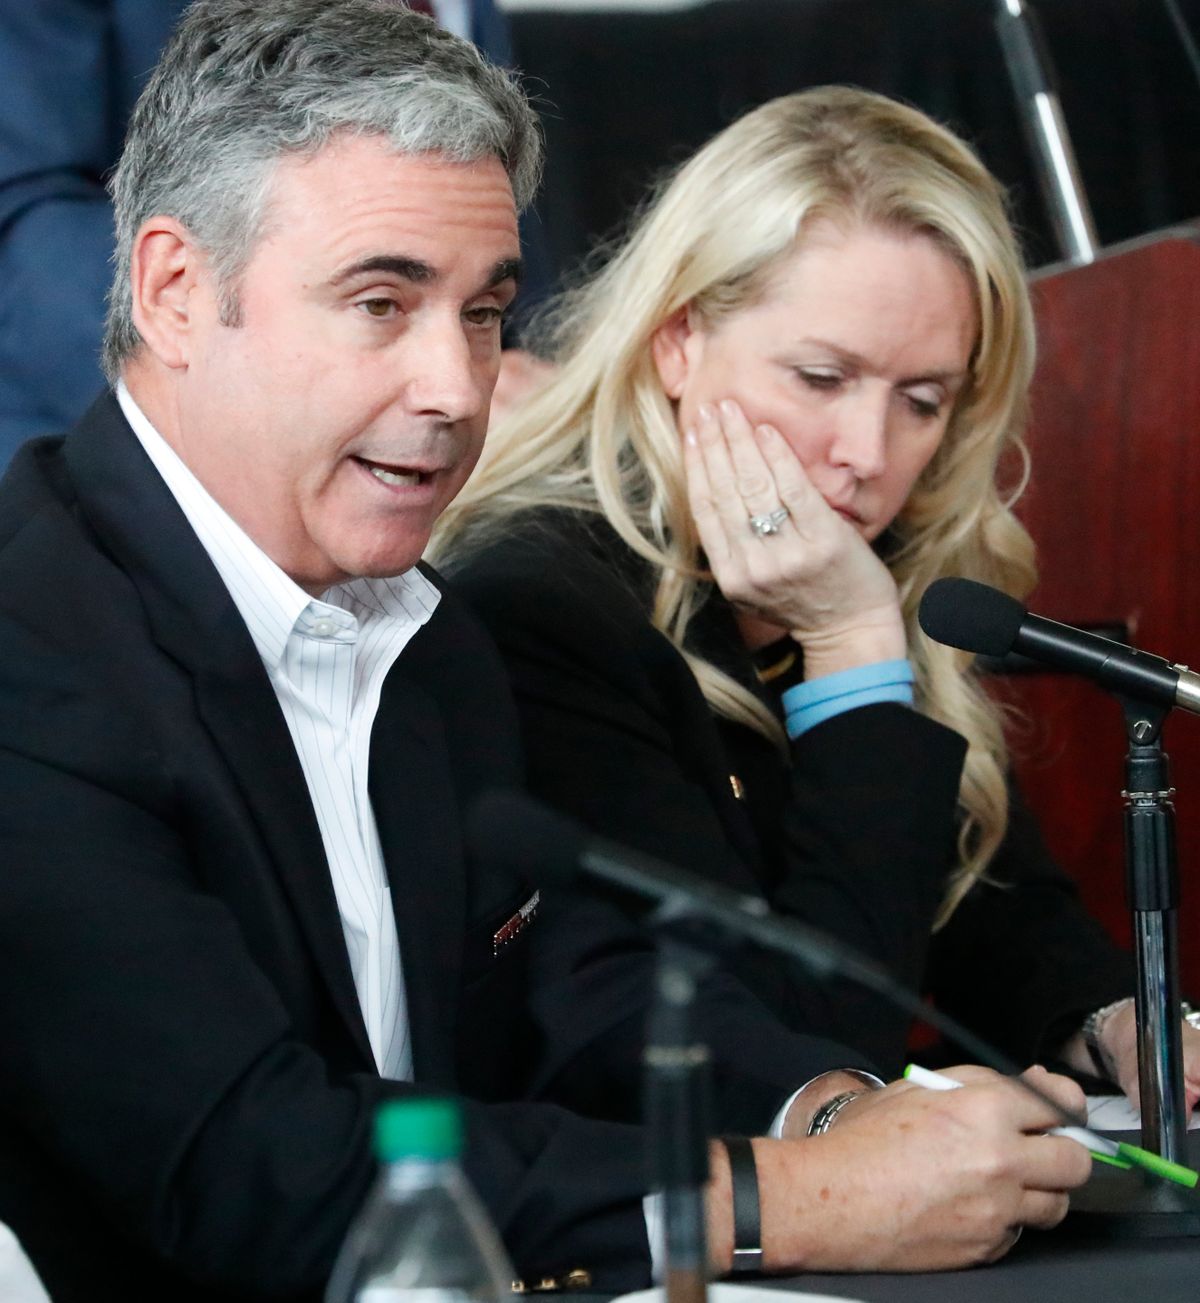 Parkland parent Tom Hoyer, speaks during to the Marjory Stoneman Douglas High School Public Safety Commission as his wife Gena, right, looks on, April 10, 2019, in Sunrise, Fla. Hoyer stood outside the Fort Lauderdale courtroom Wednesday, May 25, 2022 where jury selection is underway in the penalty phase of the gunman who killed his son Luke and 16 others at Marjory Stoneman Douglas High School in 2018. He said it